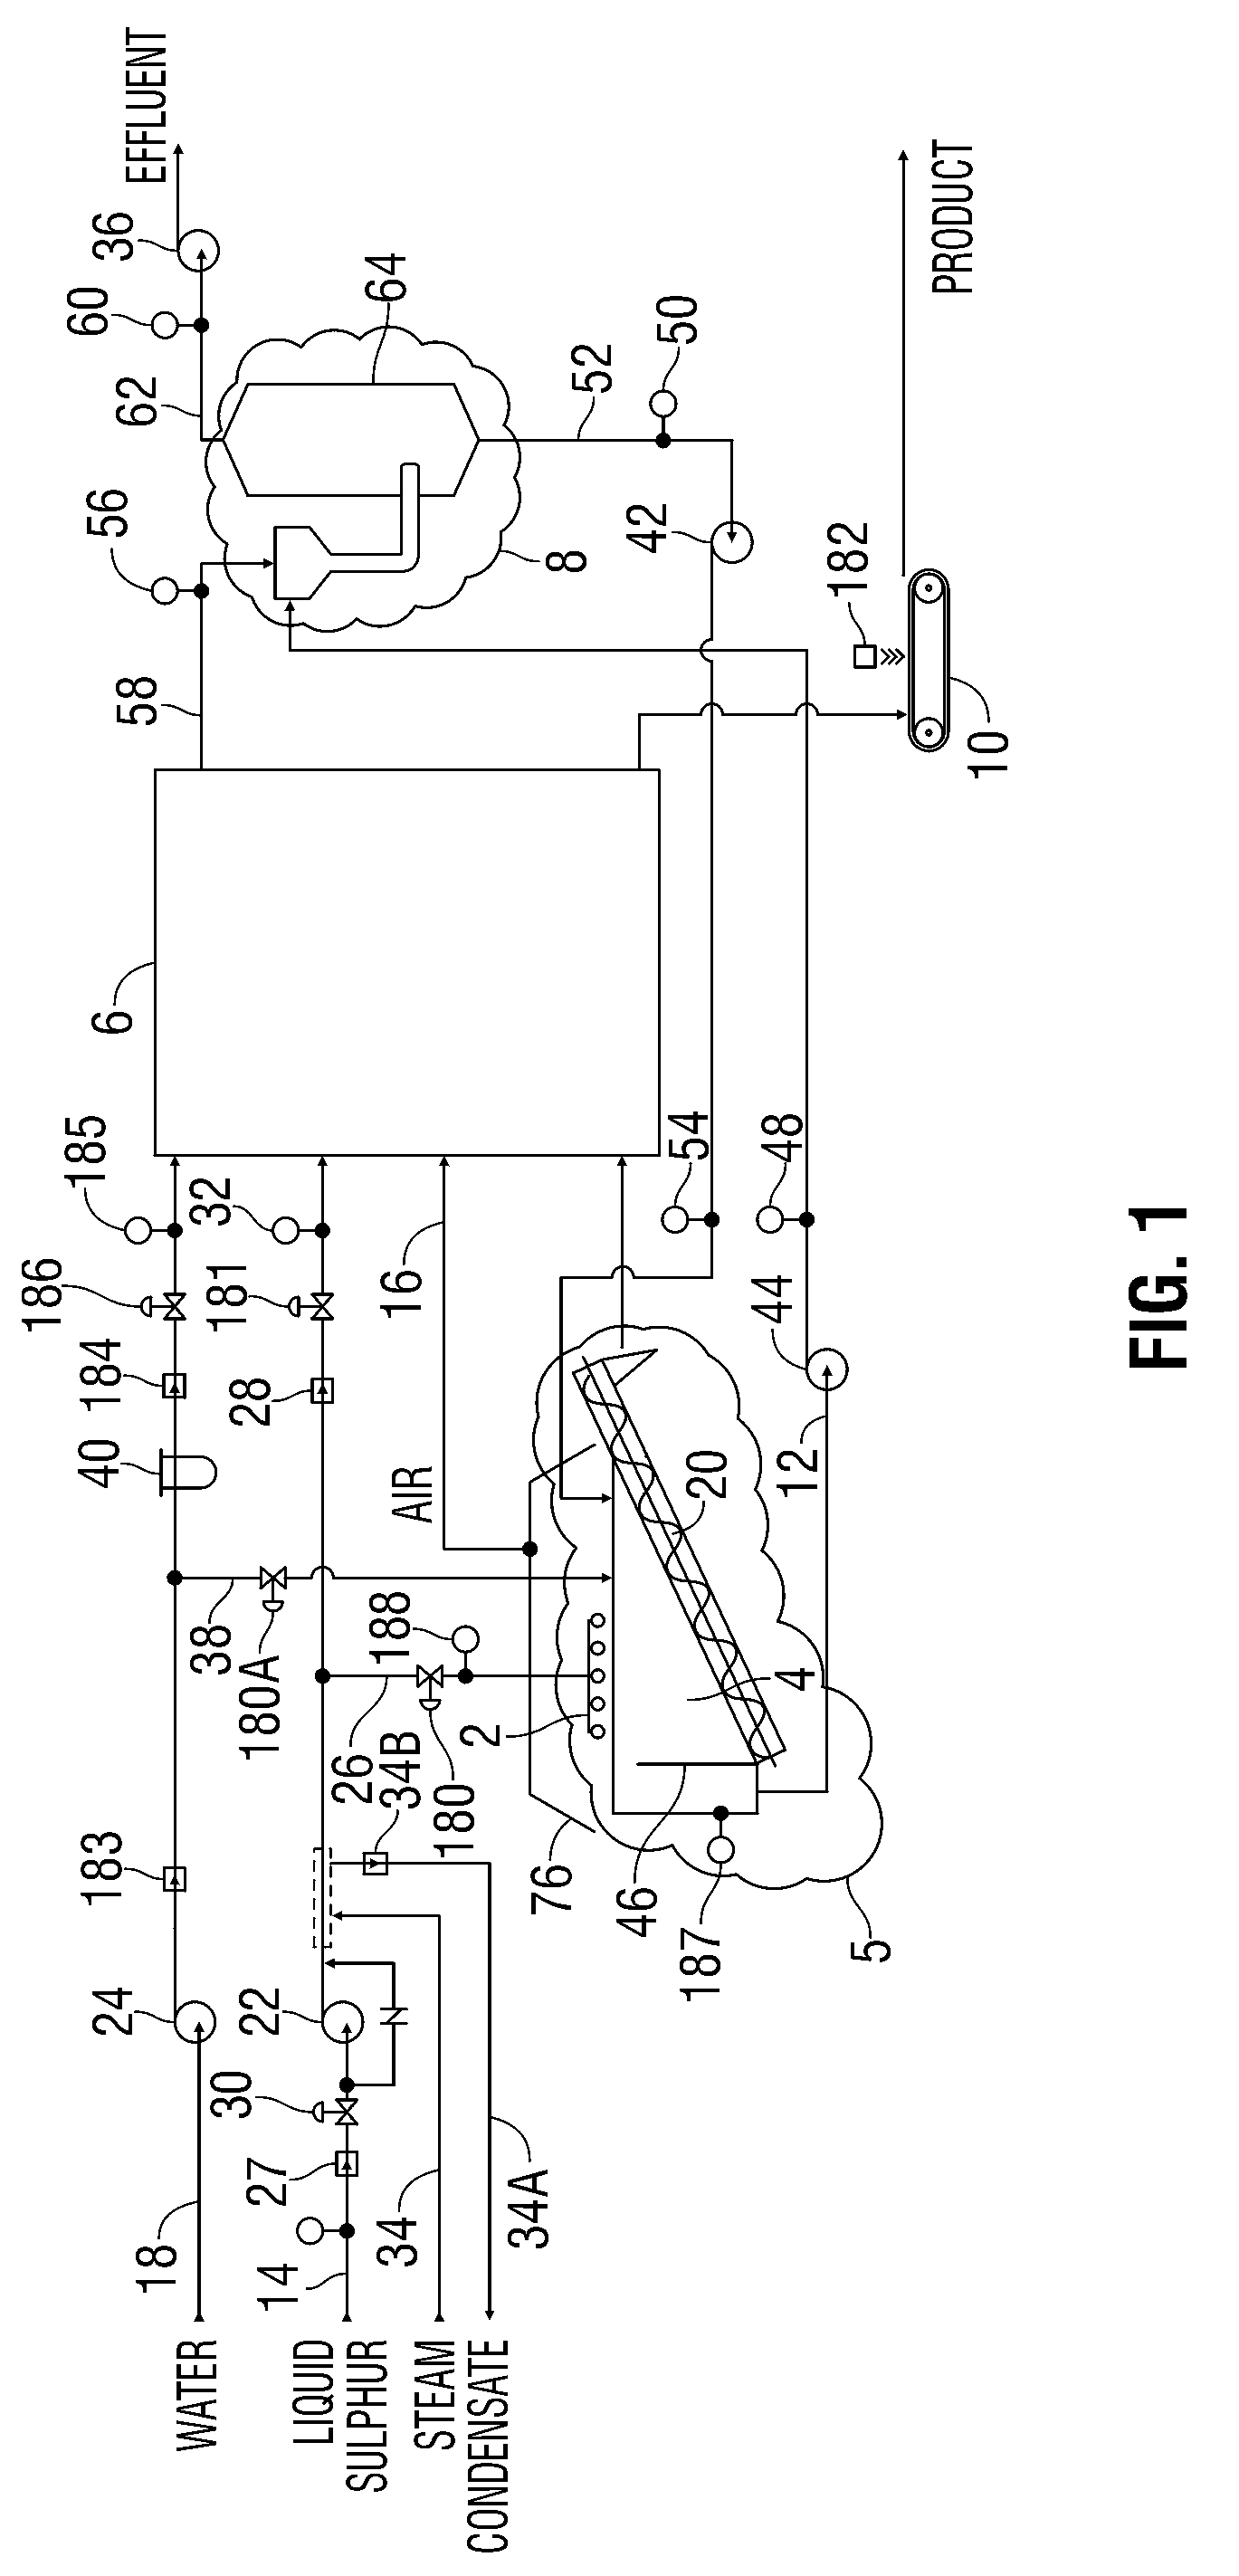 Method and system for generating sulfur seeds and granules